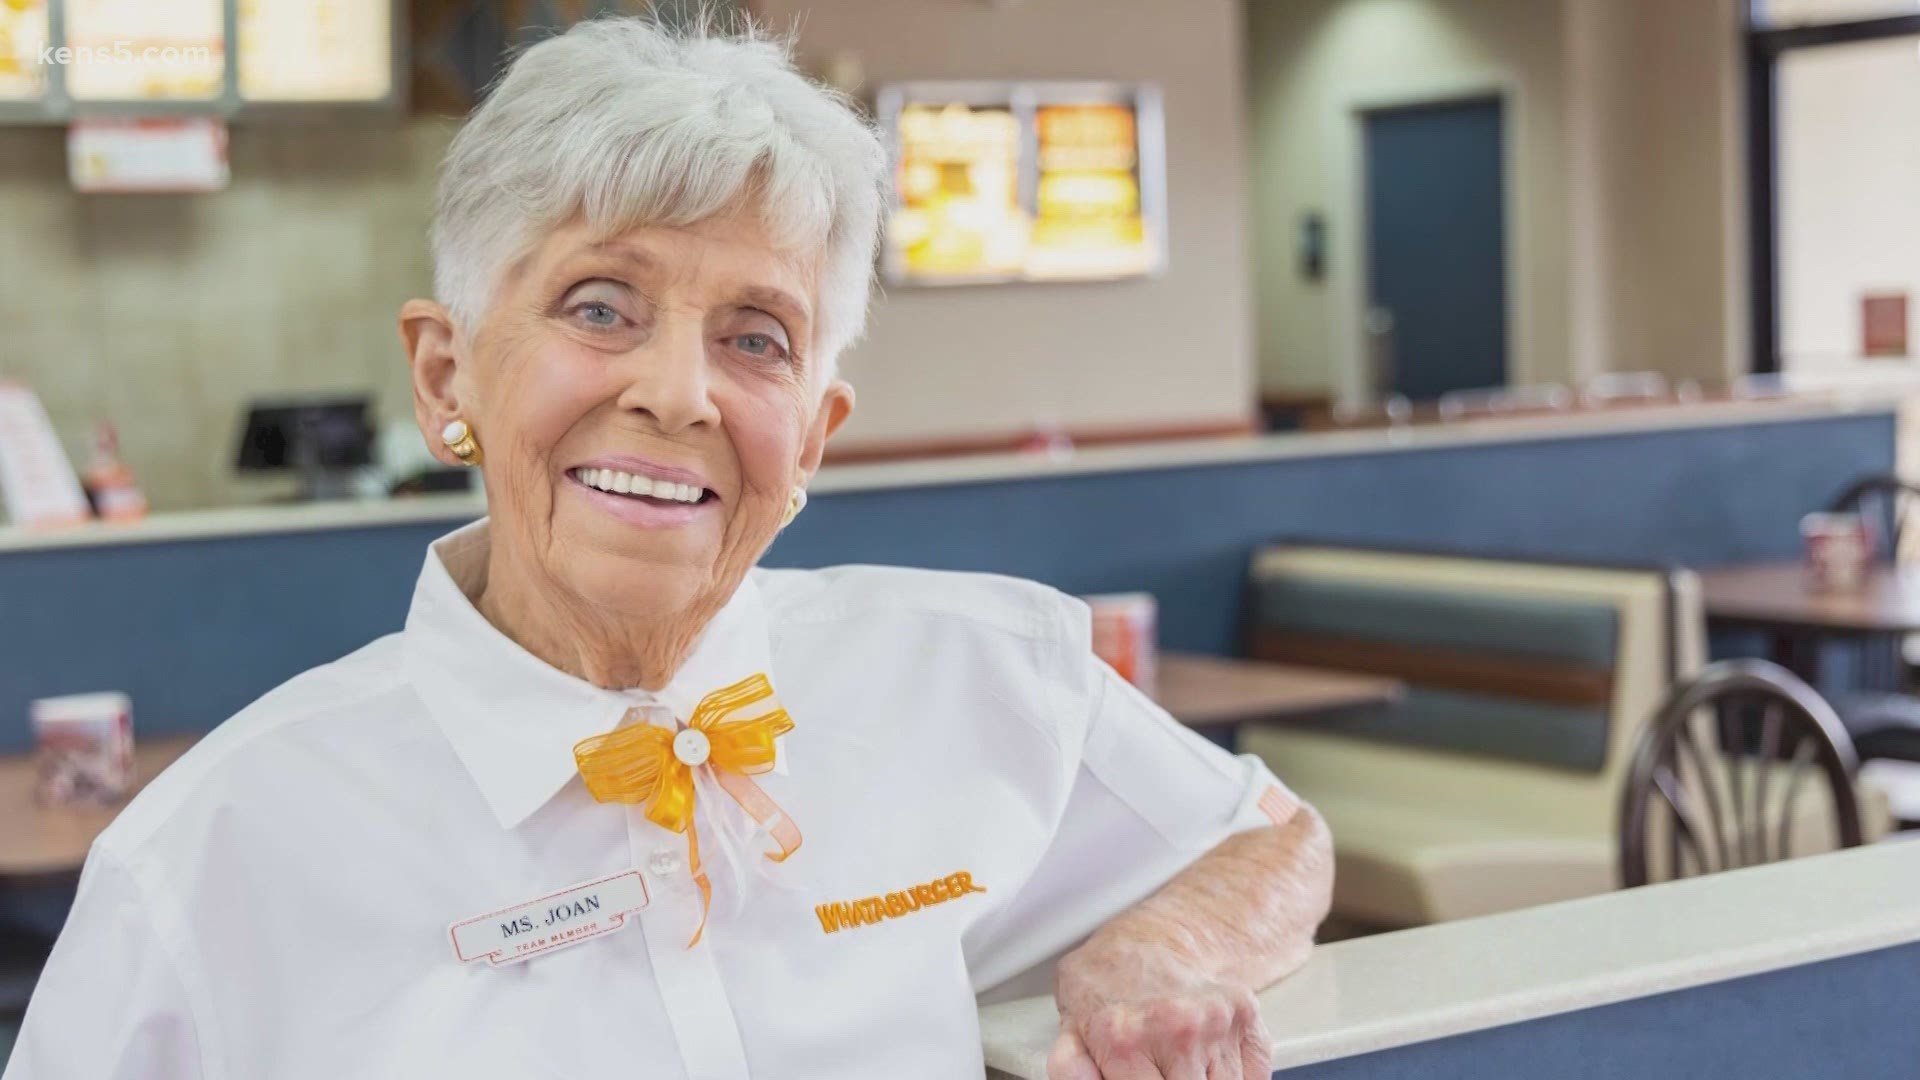 Whataburger hosted a birthday celebration for Joan Cuellar, who has been working there for 12 years. She turned 90 on Friday!